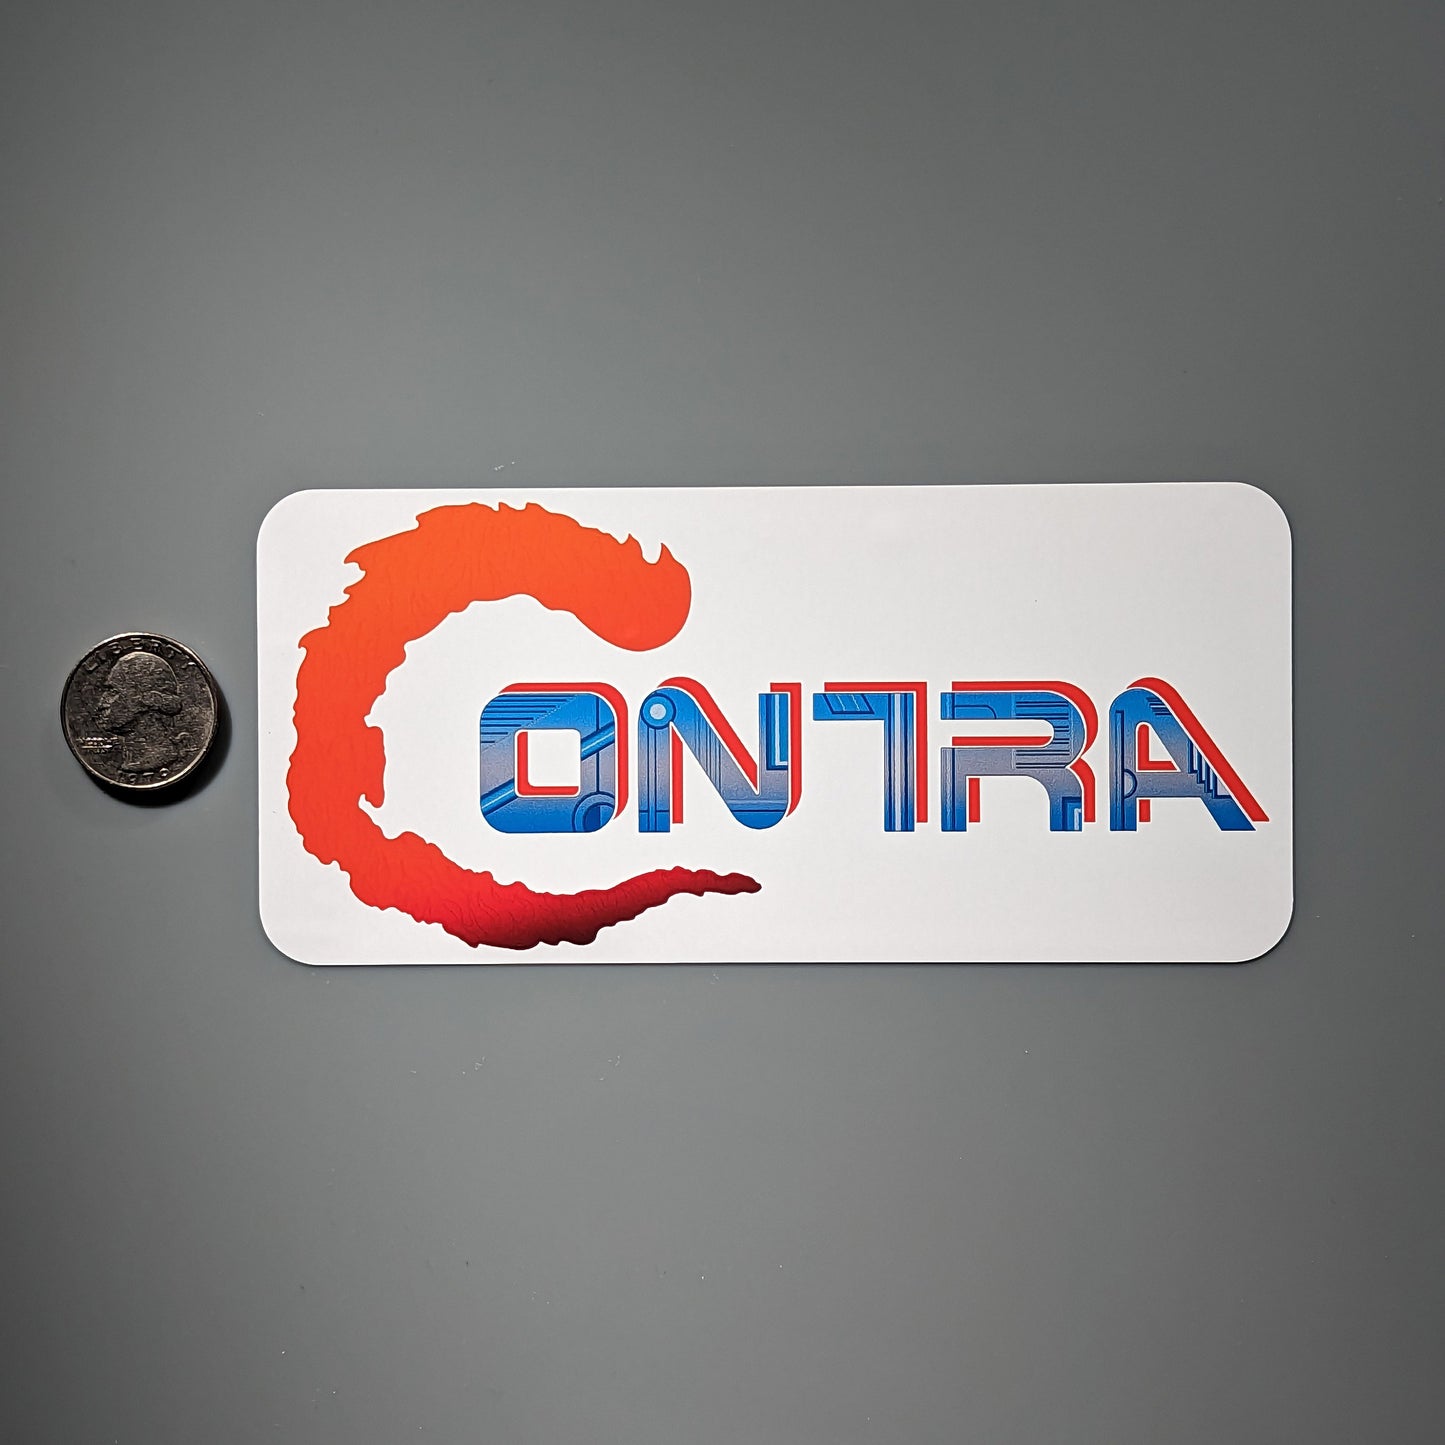 Contra Decal